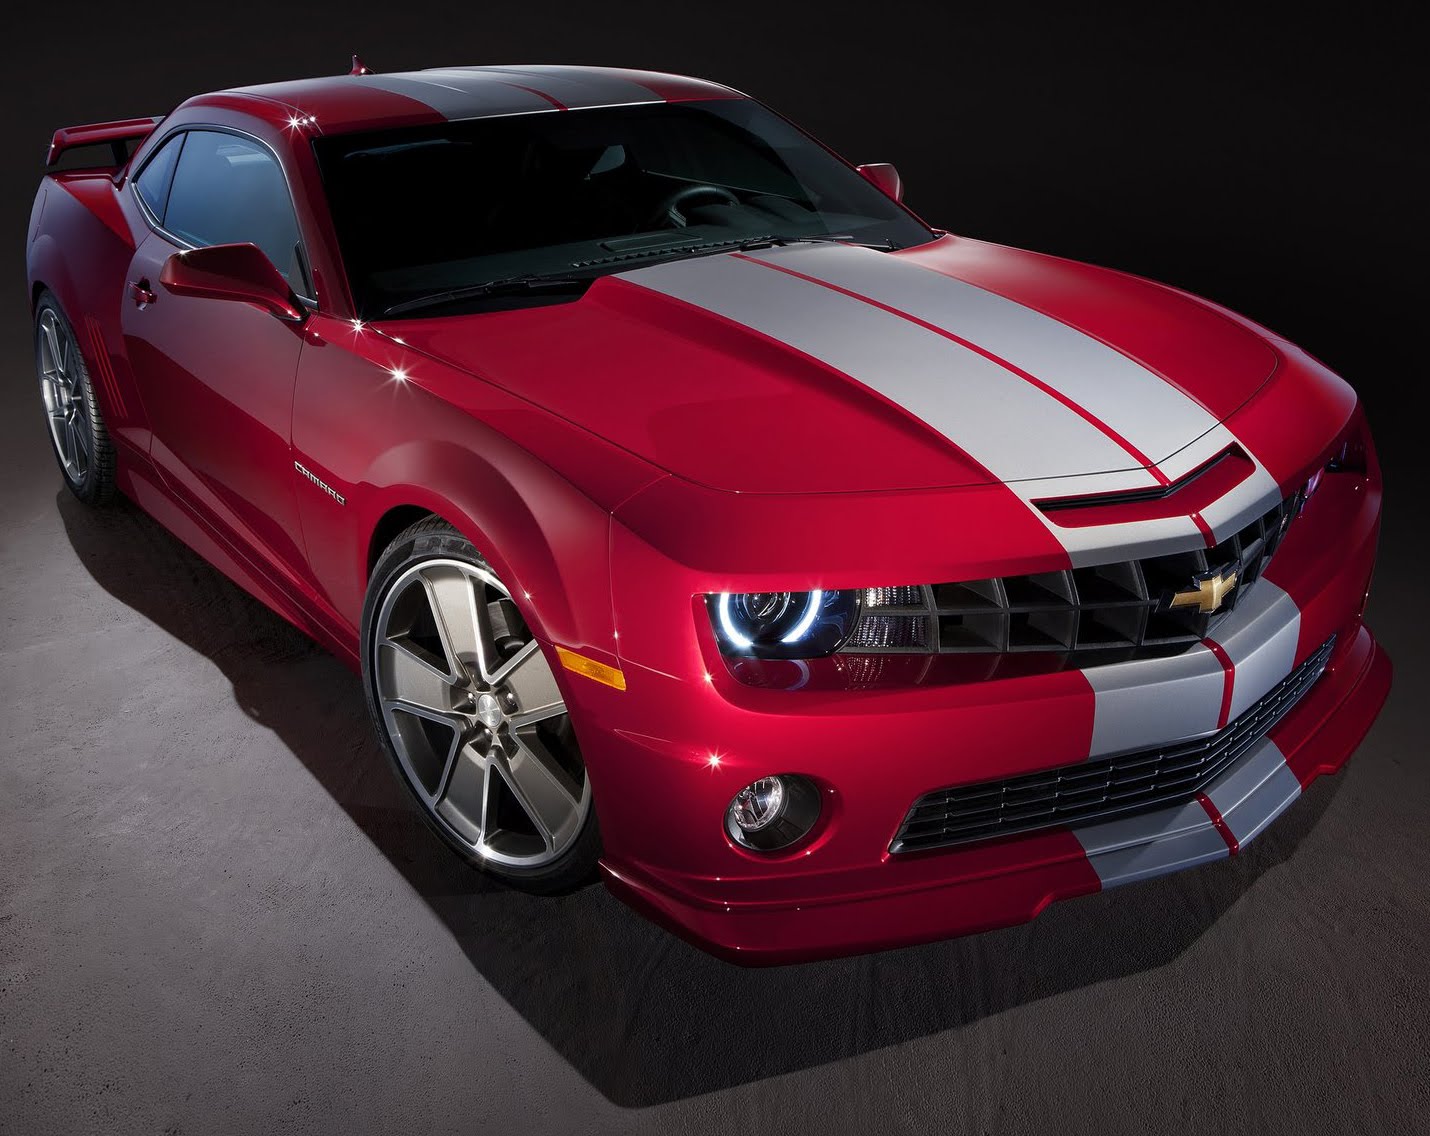 ... Cars: Chevrolet Camaro Red Flash Concept (2010) Stills and Wallpapers